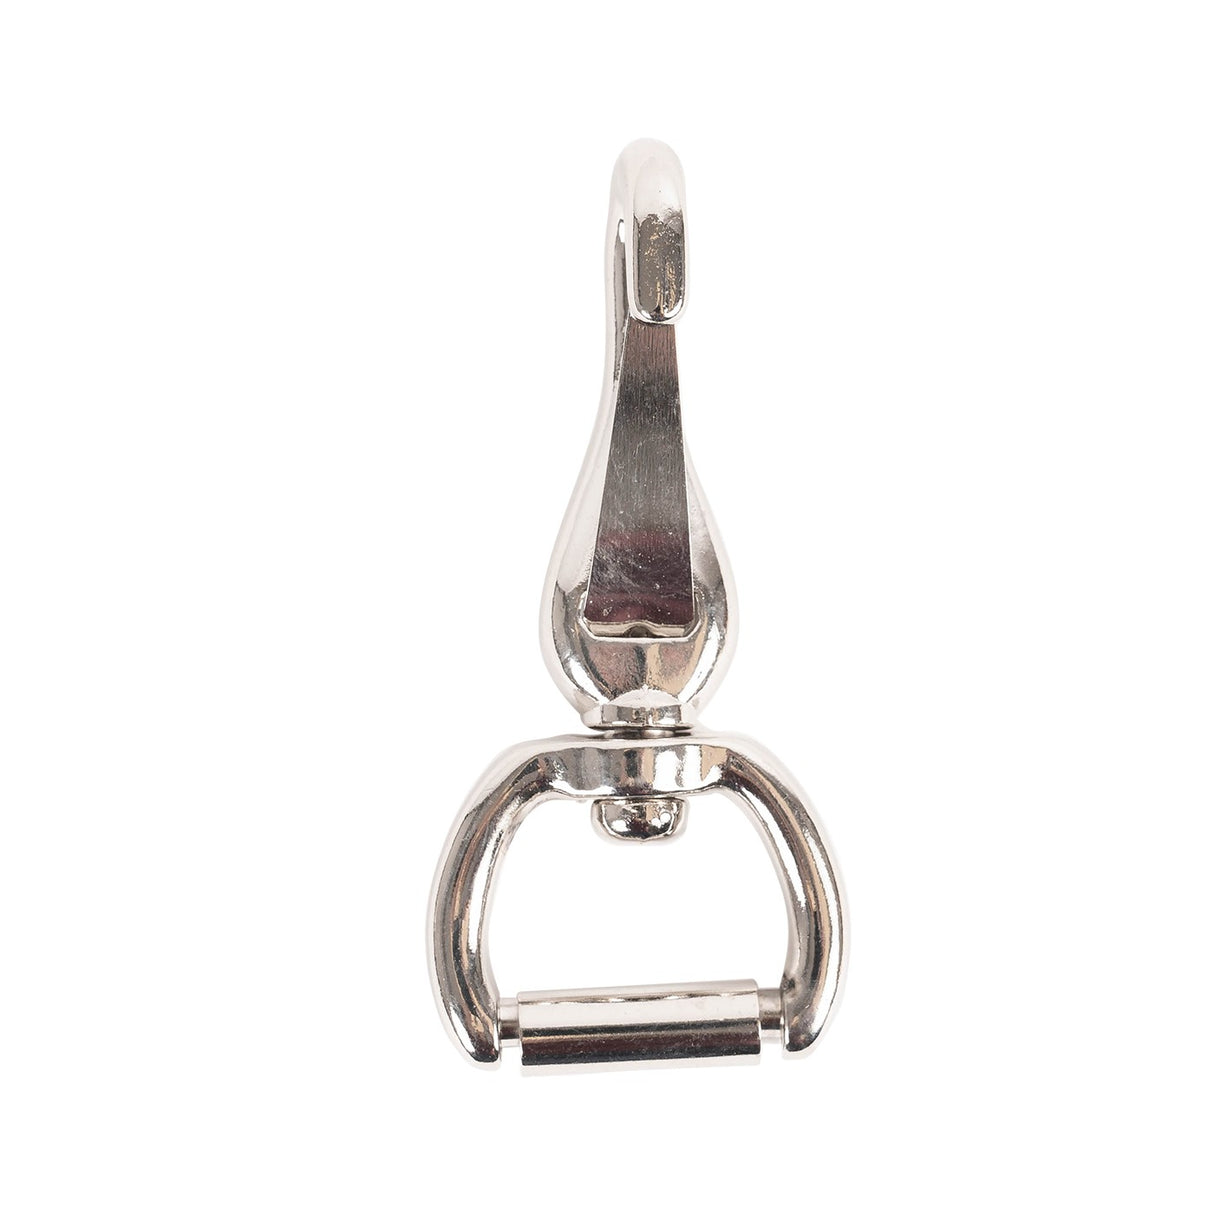 Shedrow Swivel Spring Nickel Plated Snap